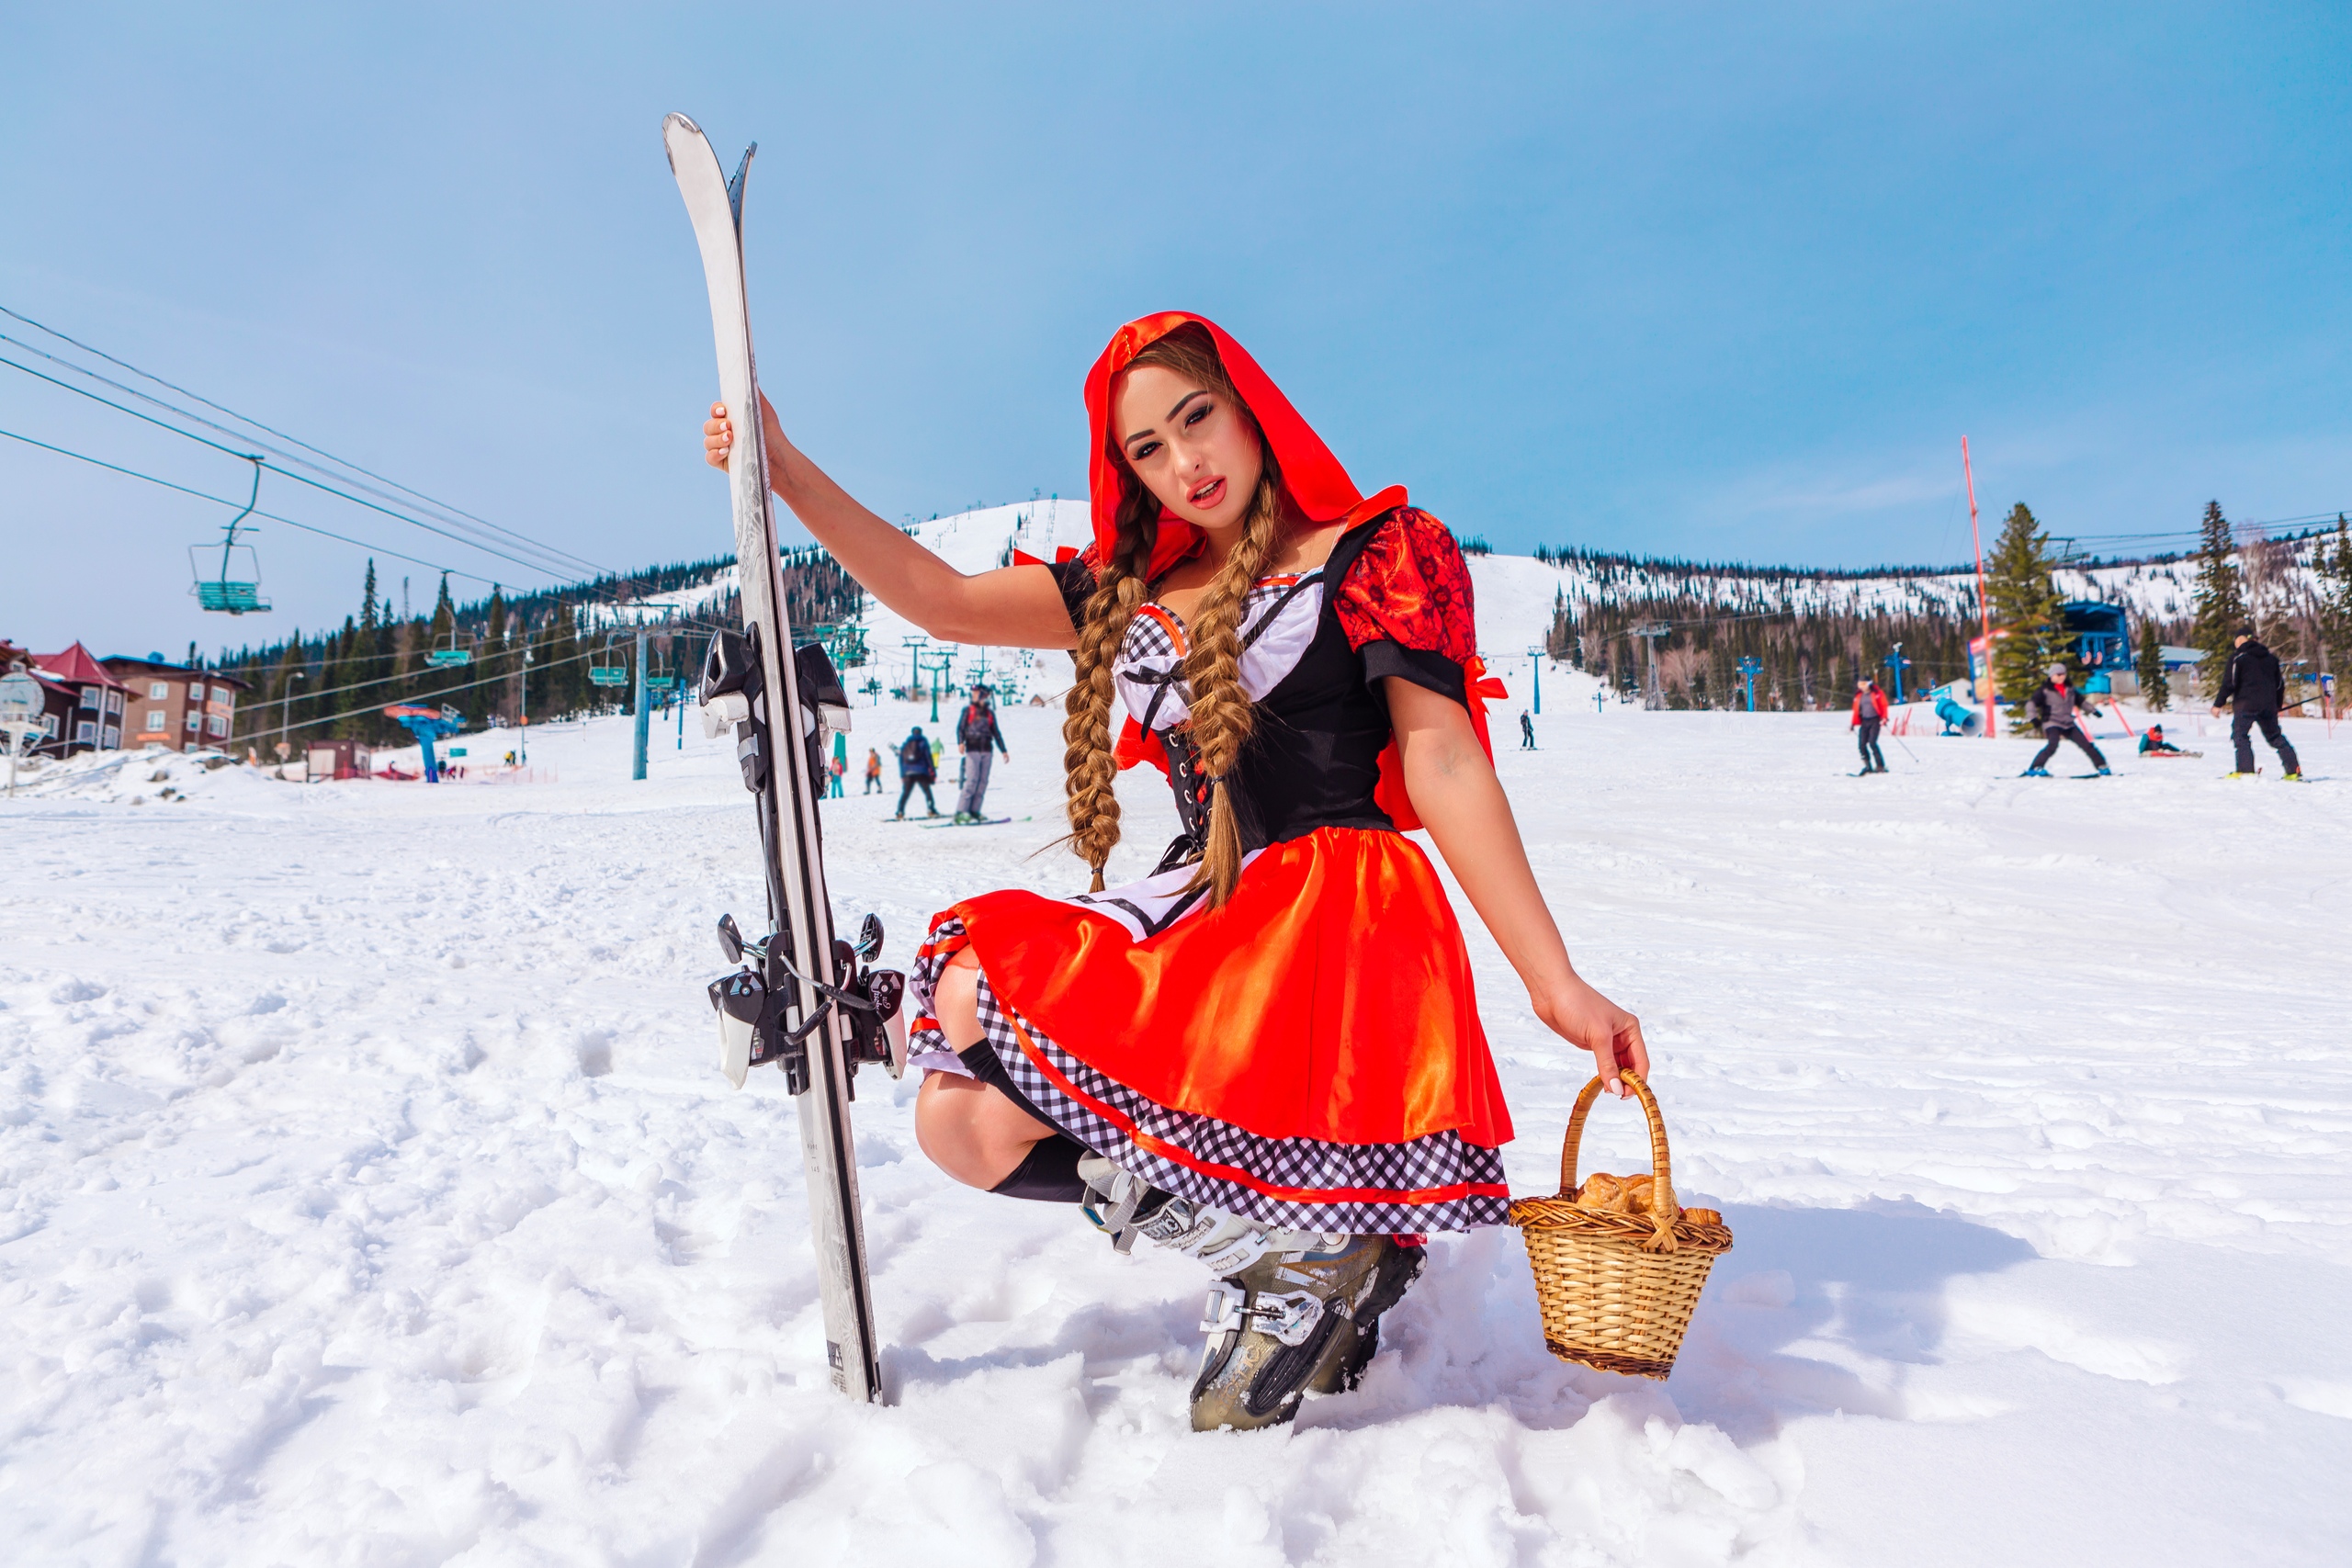 People 2560x1707 women model brunette braids long hair looking at viewer portrait squatting skis dress baskets sweets croissants people ski lift sky clear sky snow Little Red Riding Hood